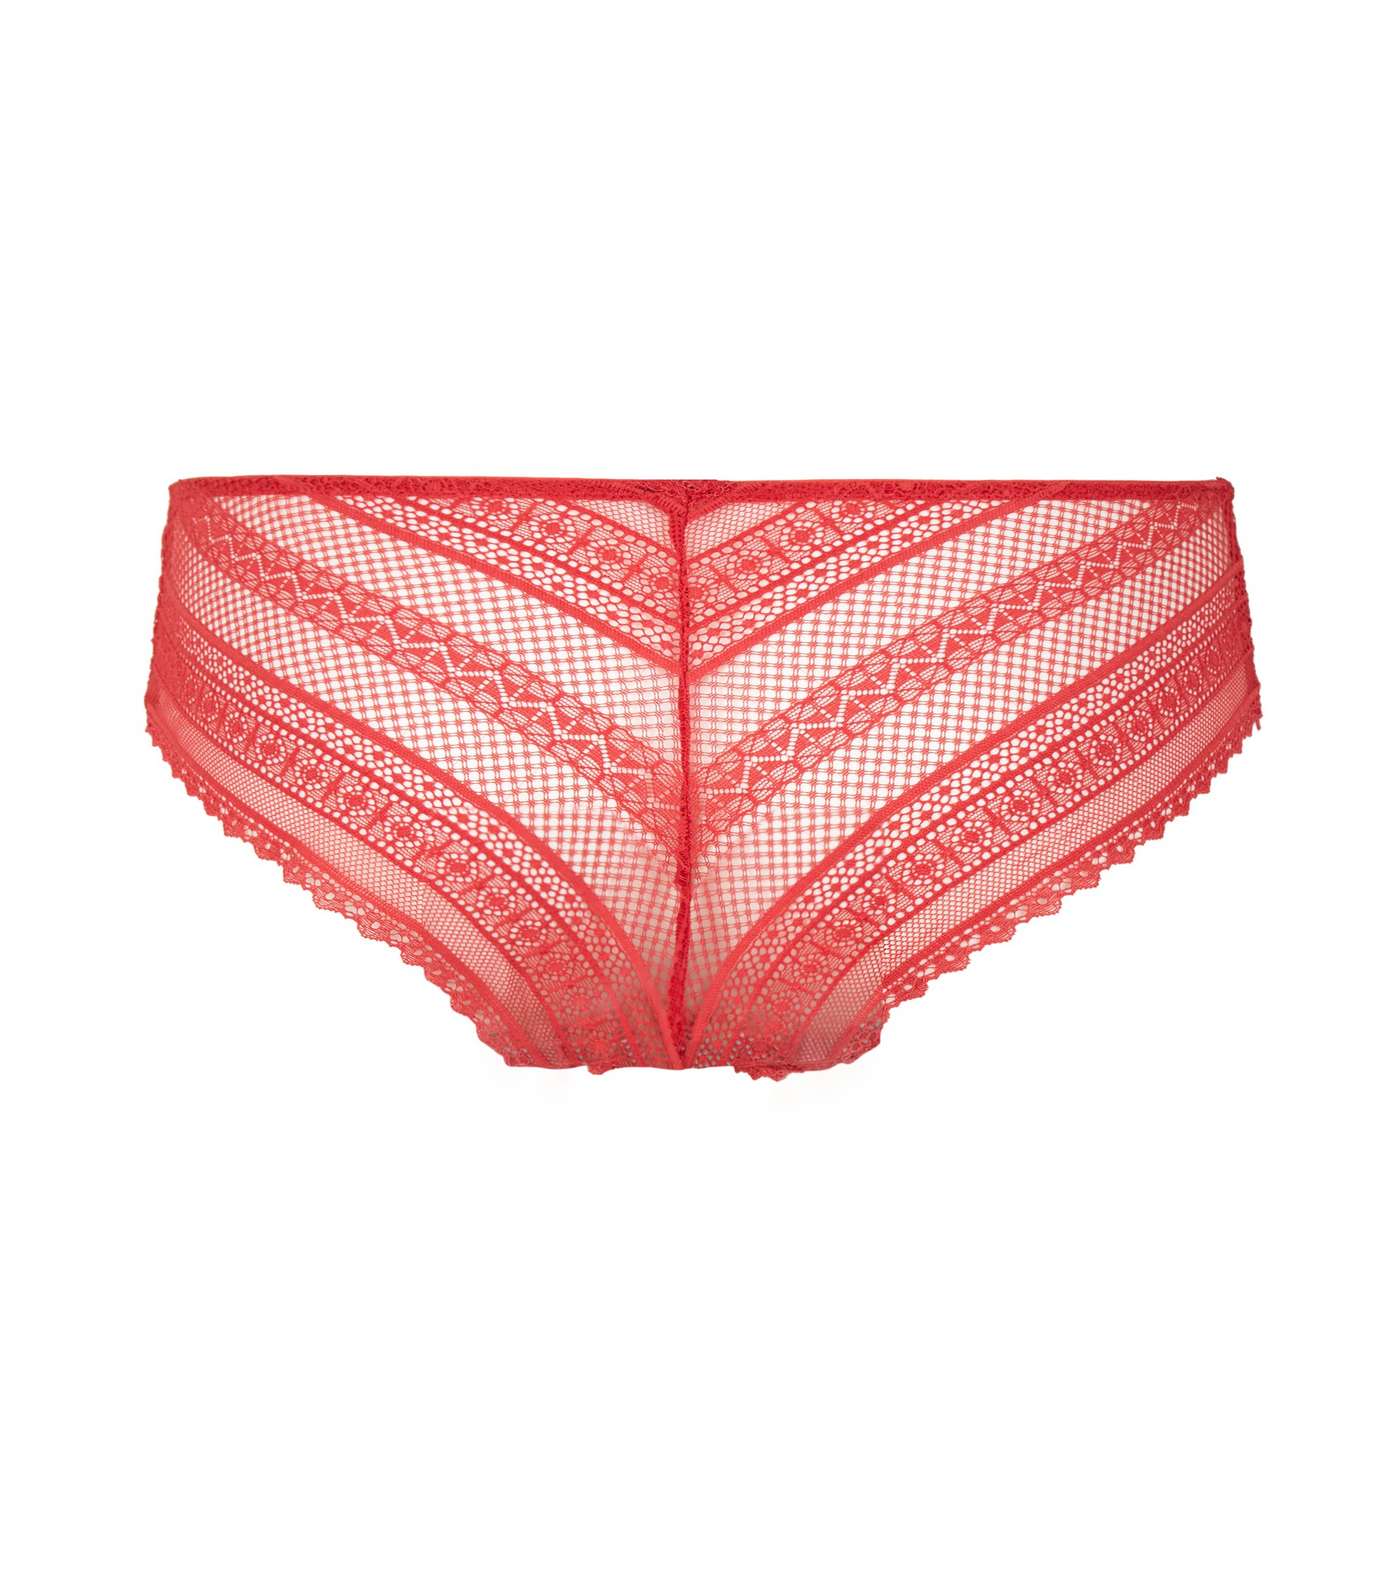 Red Geometric Lace Short Briefs Image 5